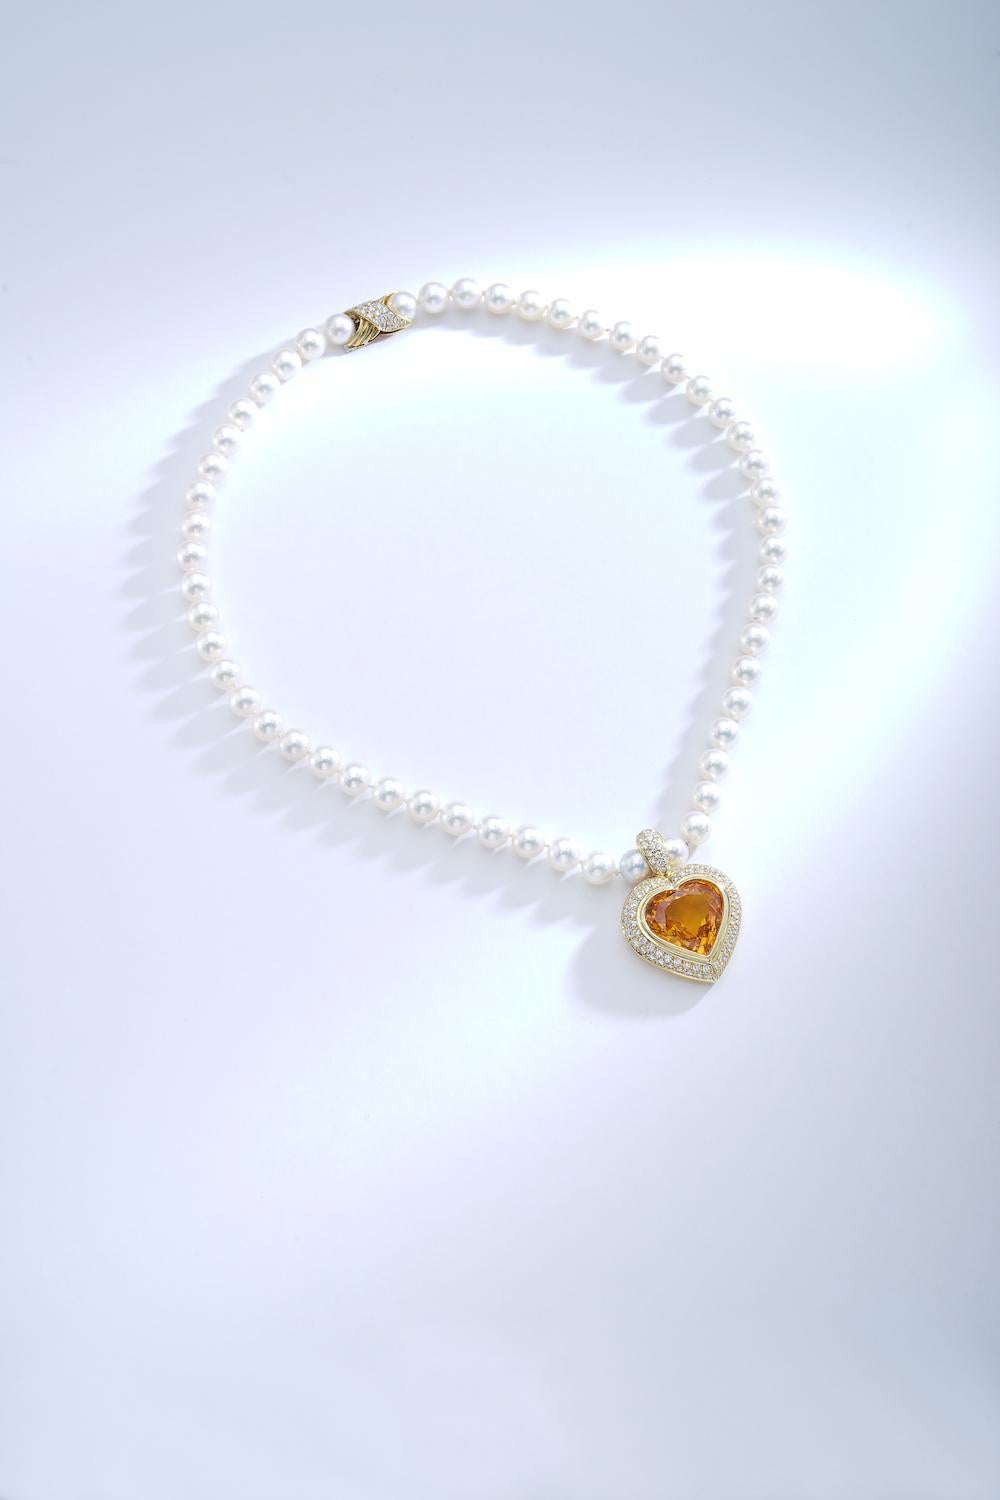 Gorgeous! This yellow Sapphire weights 24.39 carats Heart shape mounted on yellow gold and surrounded by diamond. The pendant is held by cultured pearl necklace and the clasp is in yellow gold with diamond 0.41 carat.
Circa 1980.

By Gubelin